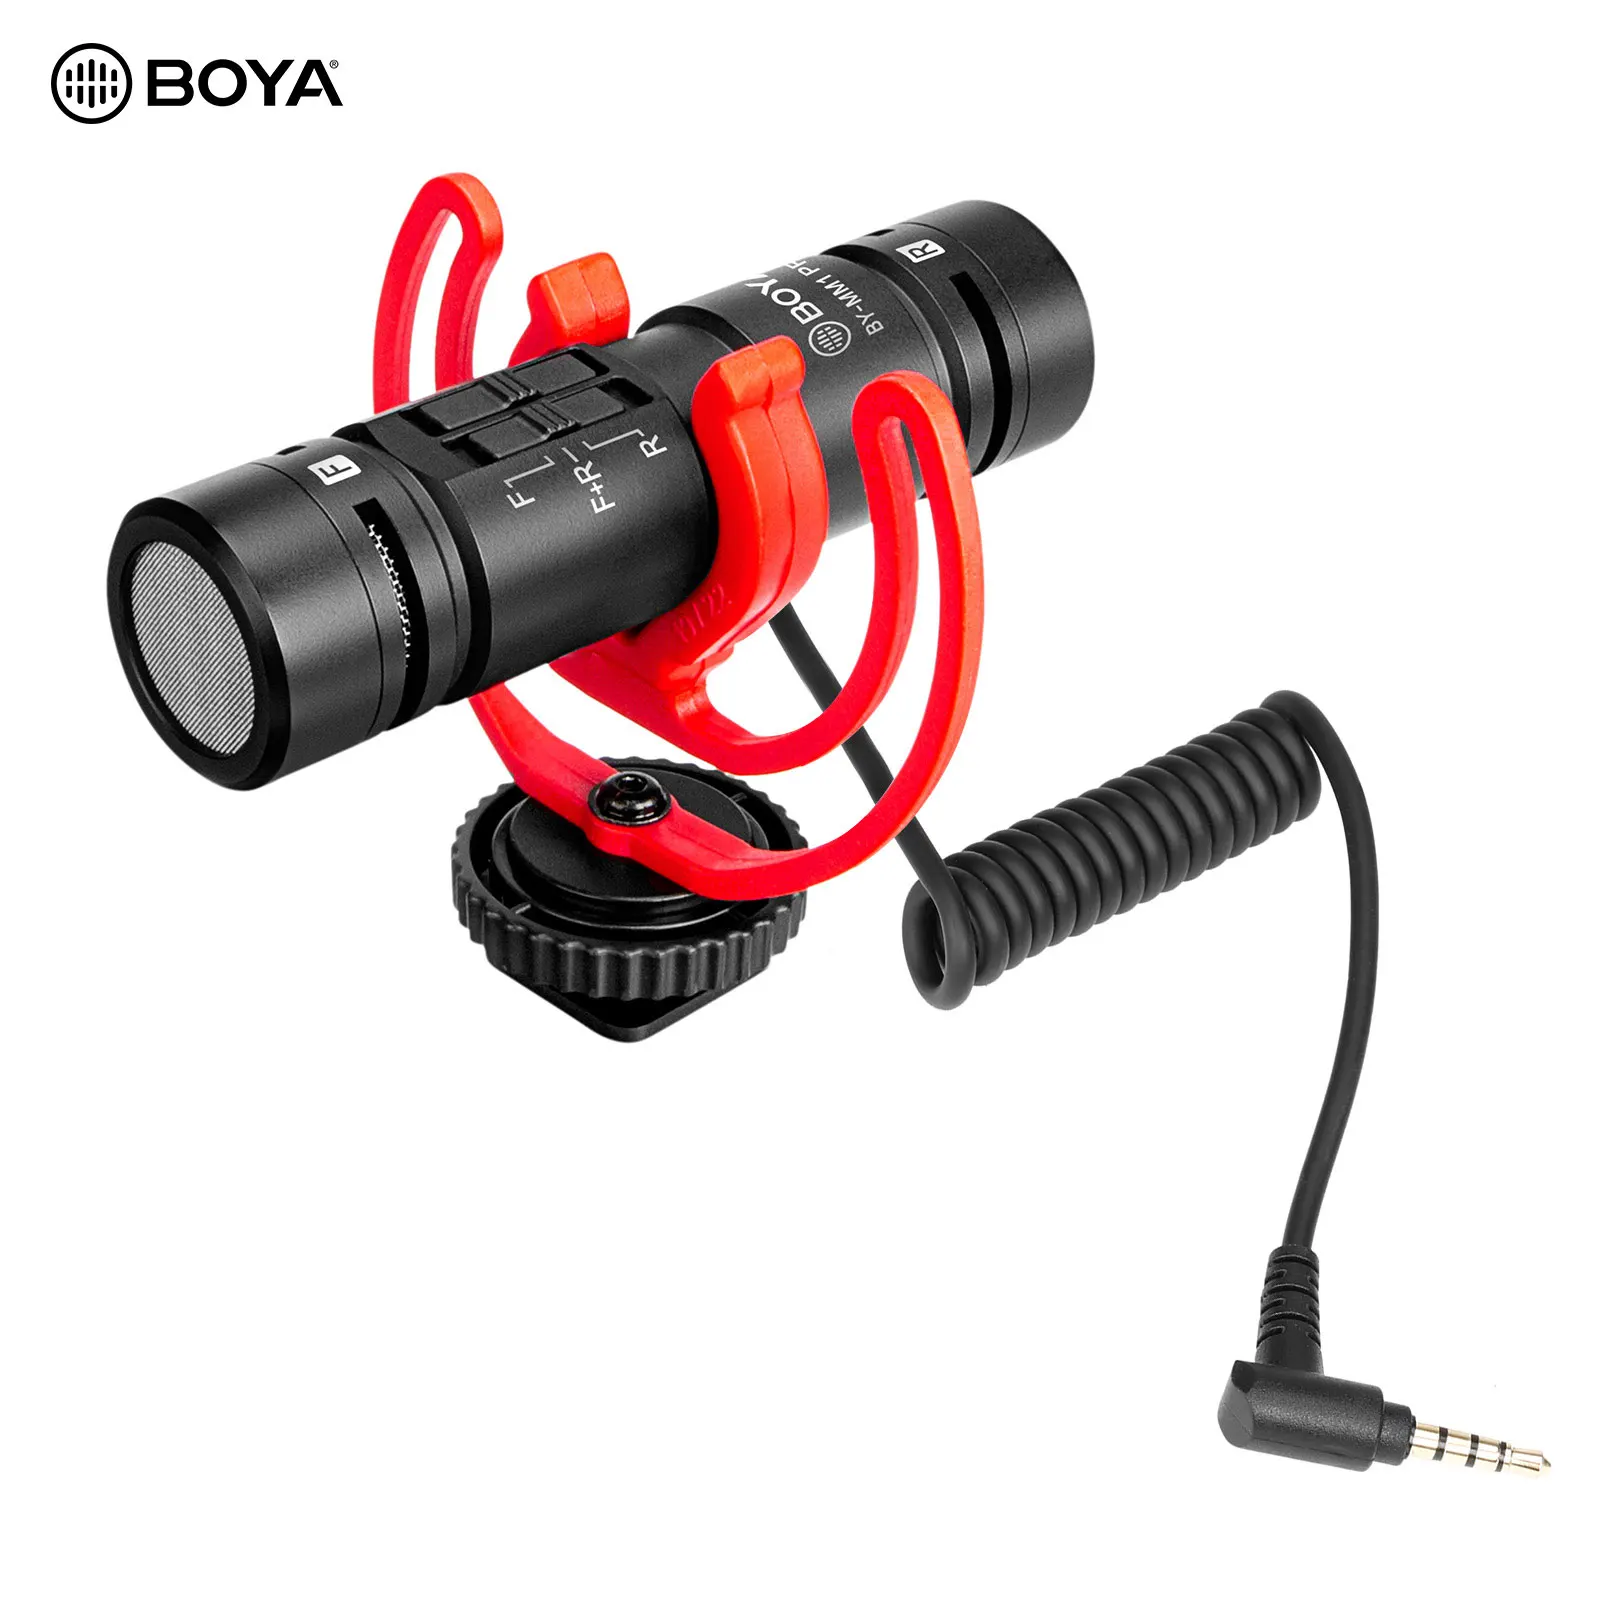 BOYA BY-MM1 MIC PRO Dual Head Video Microphone with 3.5mm TRRS Plug Cold Shoe Shock Mount for Smartphone DSLR Camera Microphone